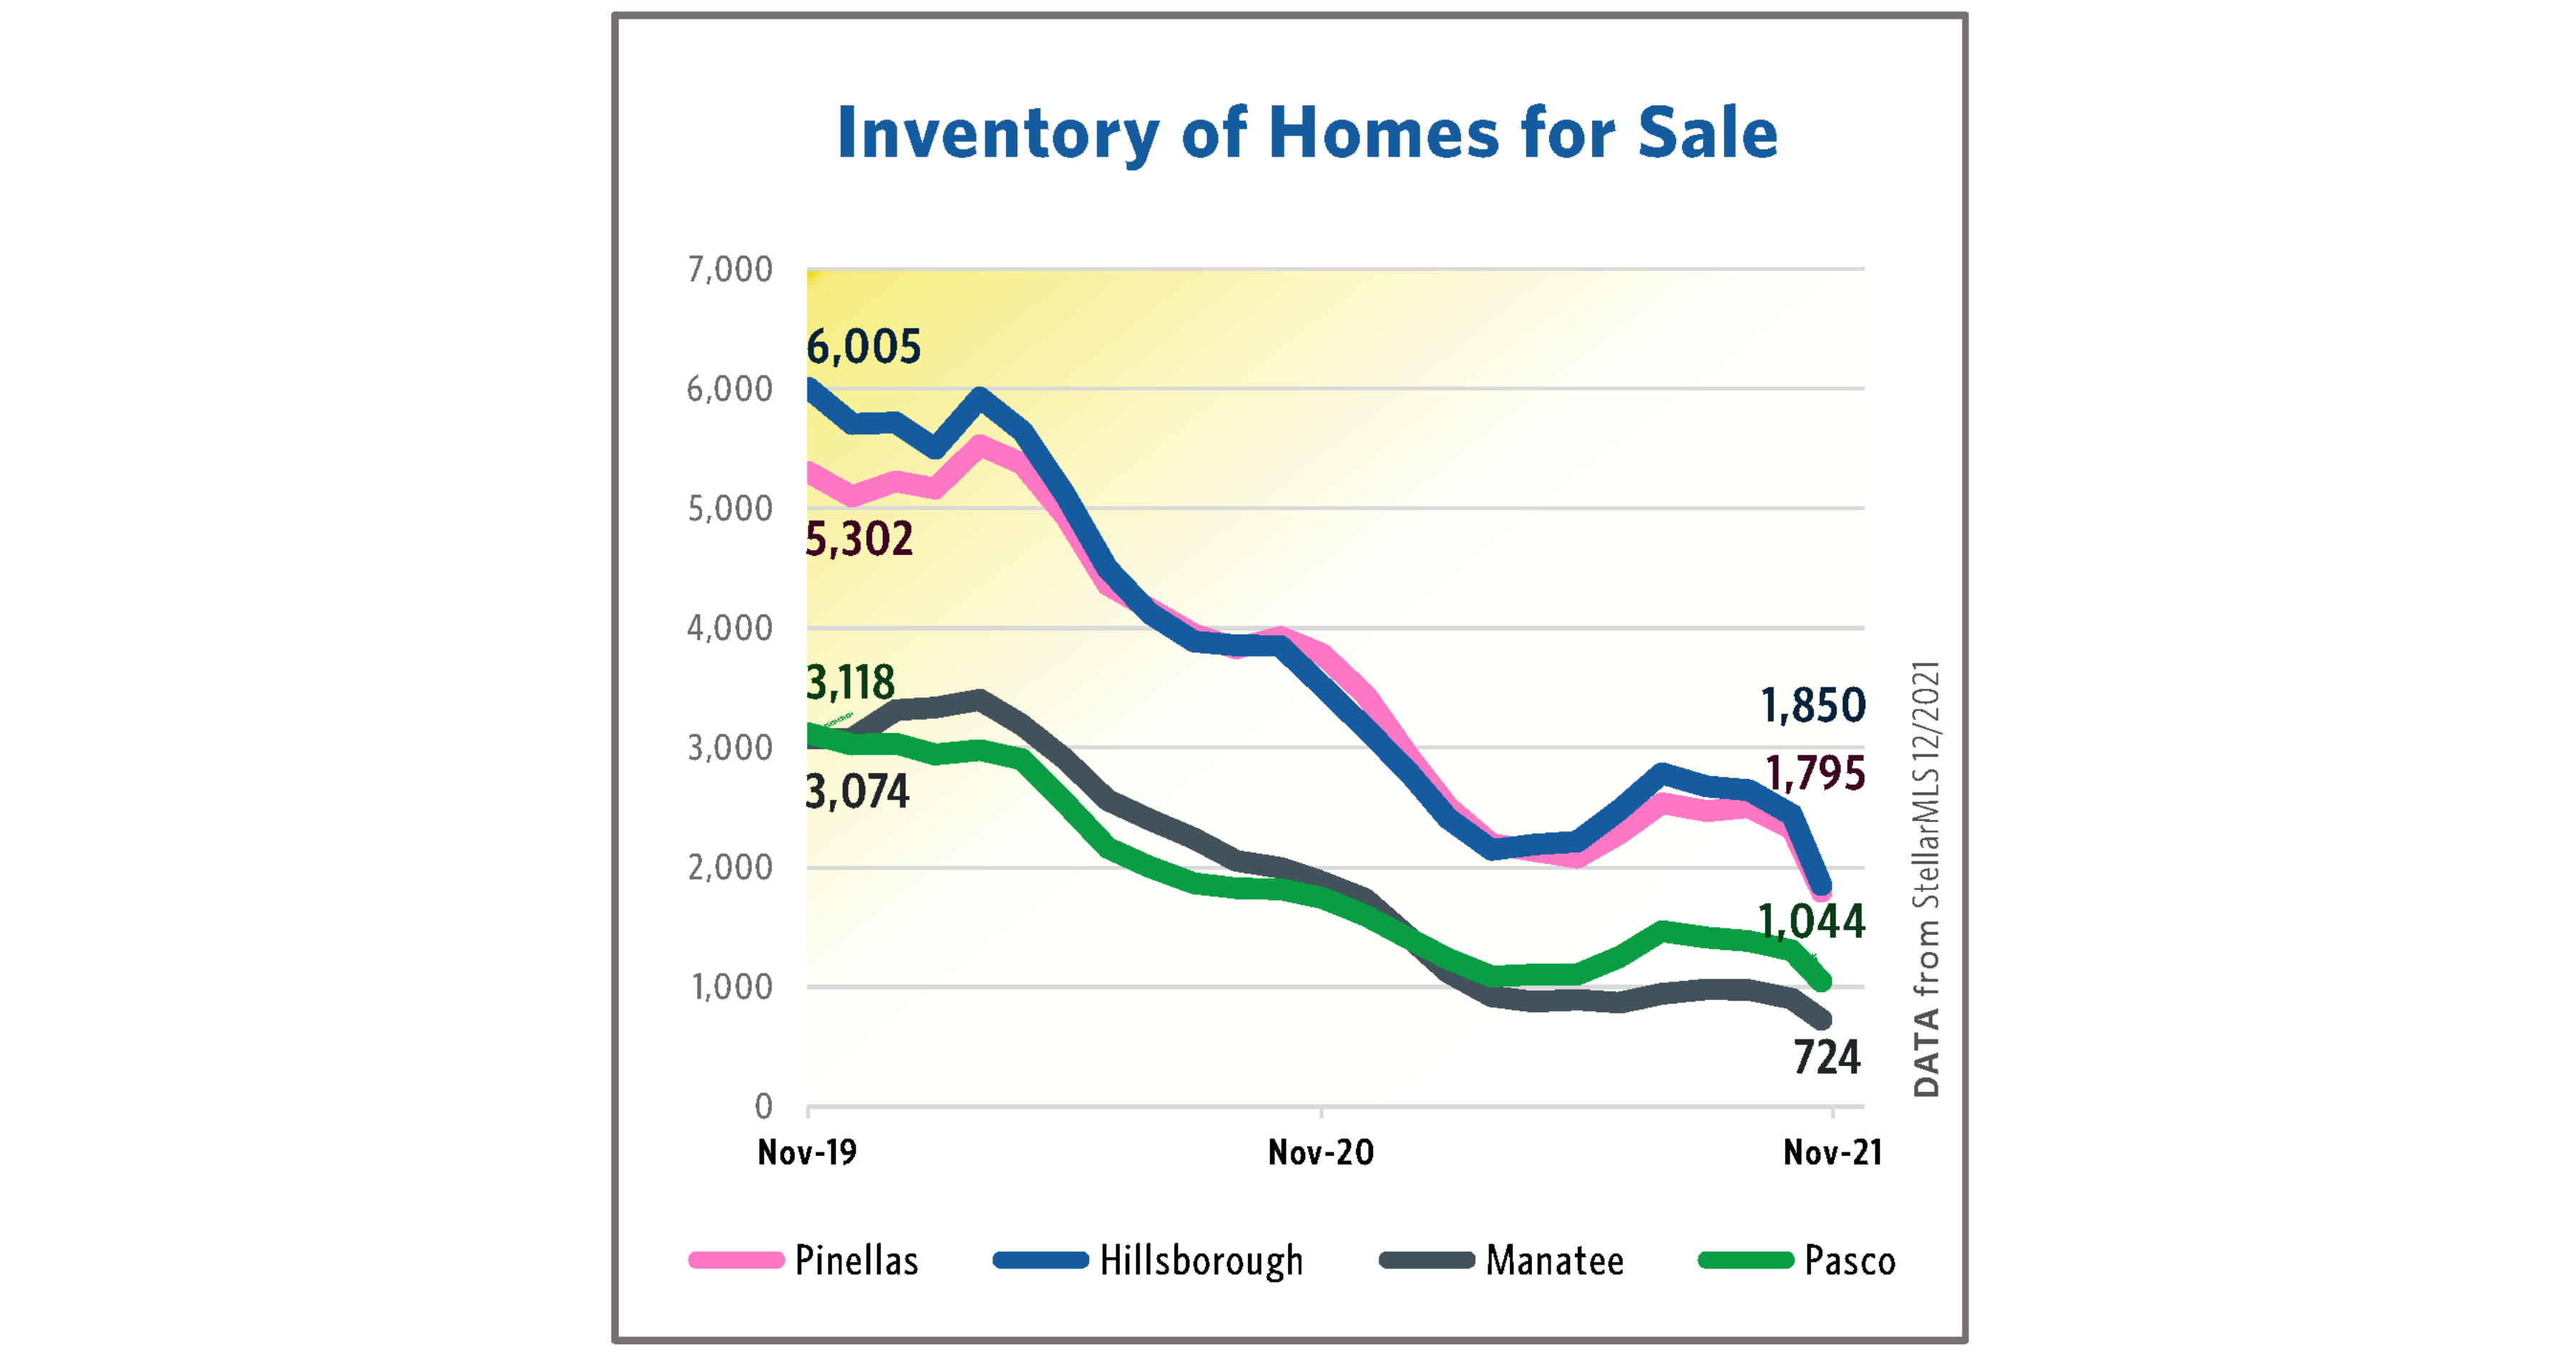 Inventory of Homes for Sale - November